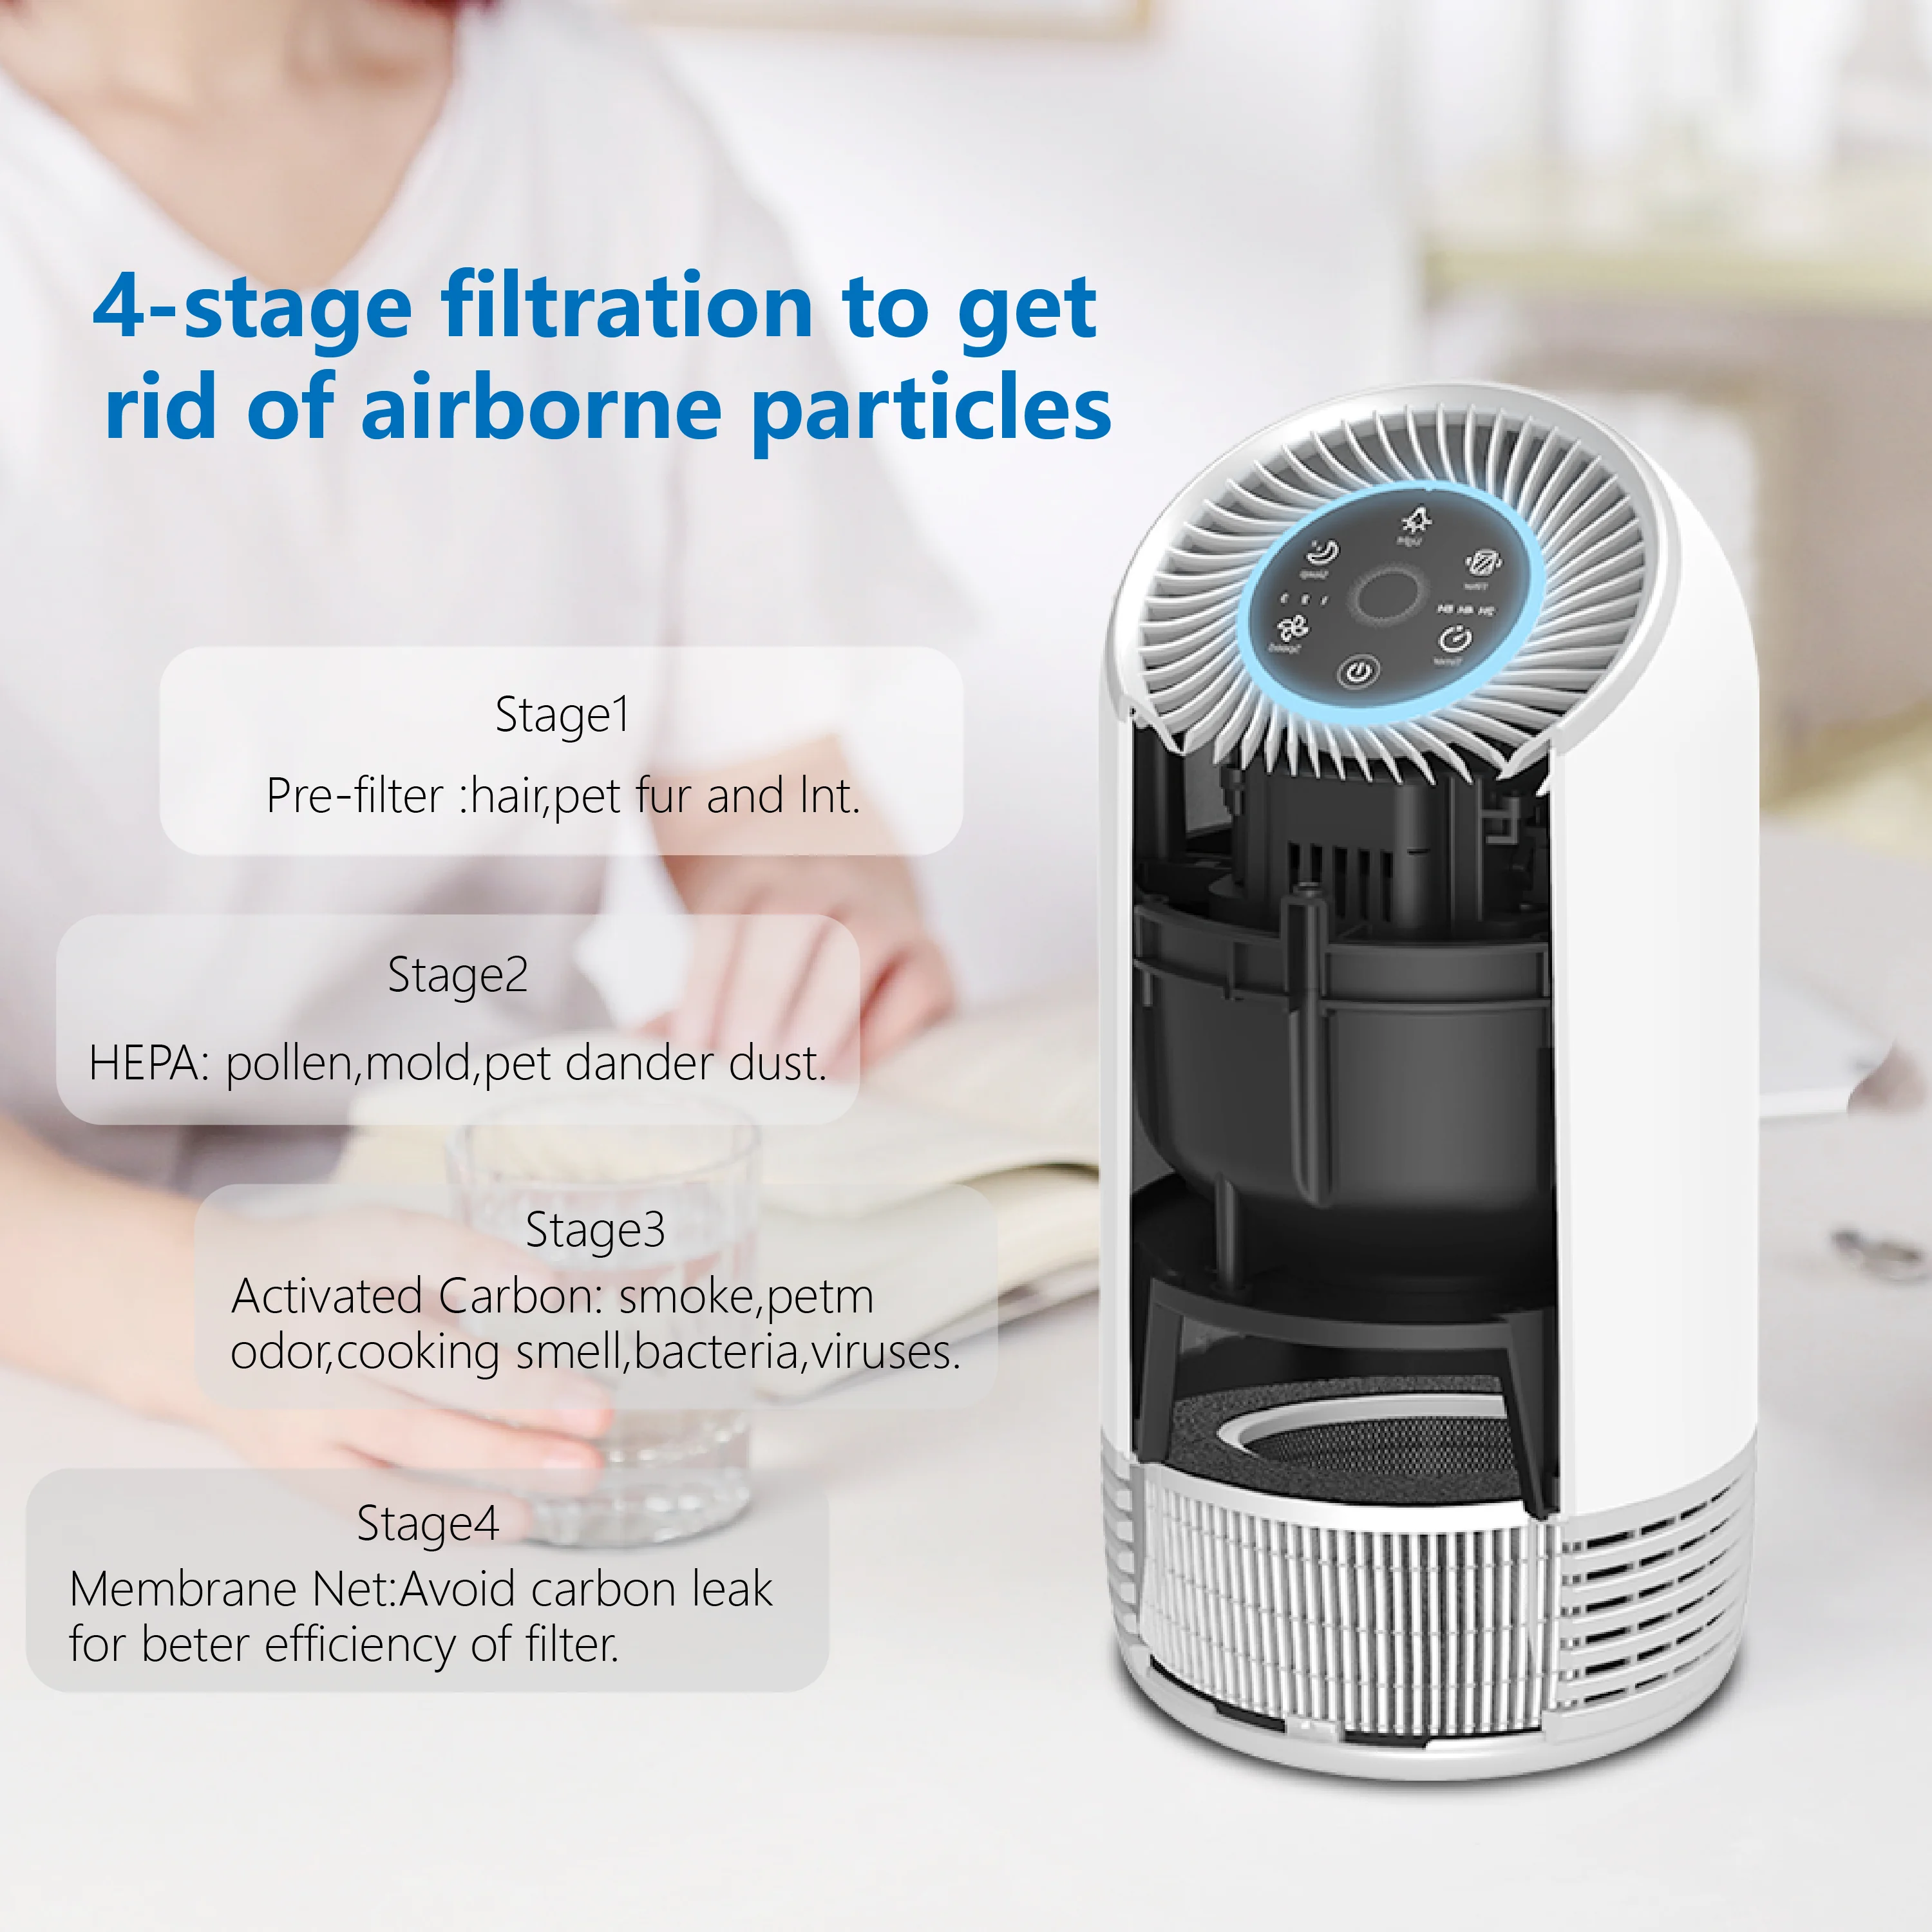 Hepa filter activated Carbon filter air purifier air cleaner for home household hospital school using air purifier